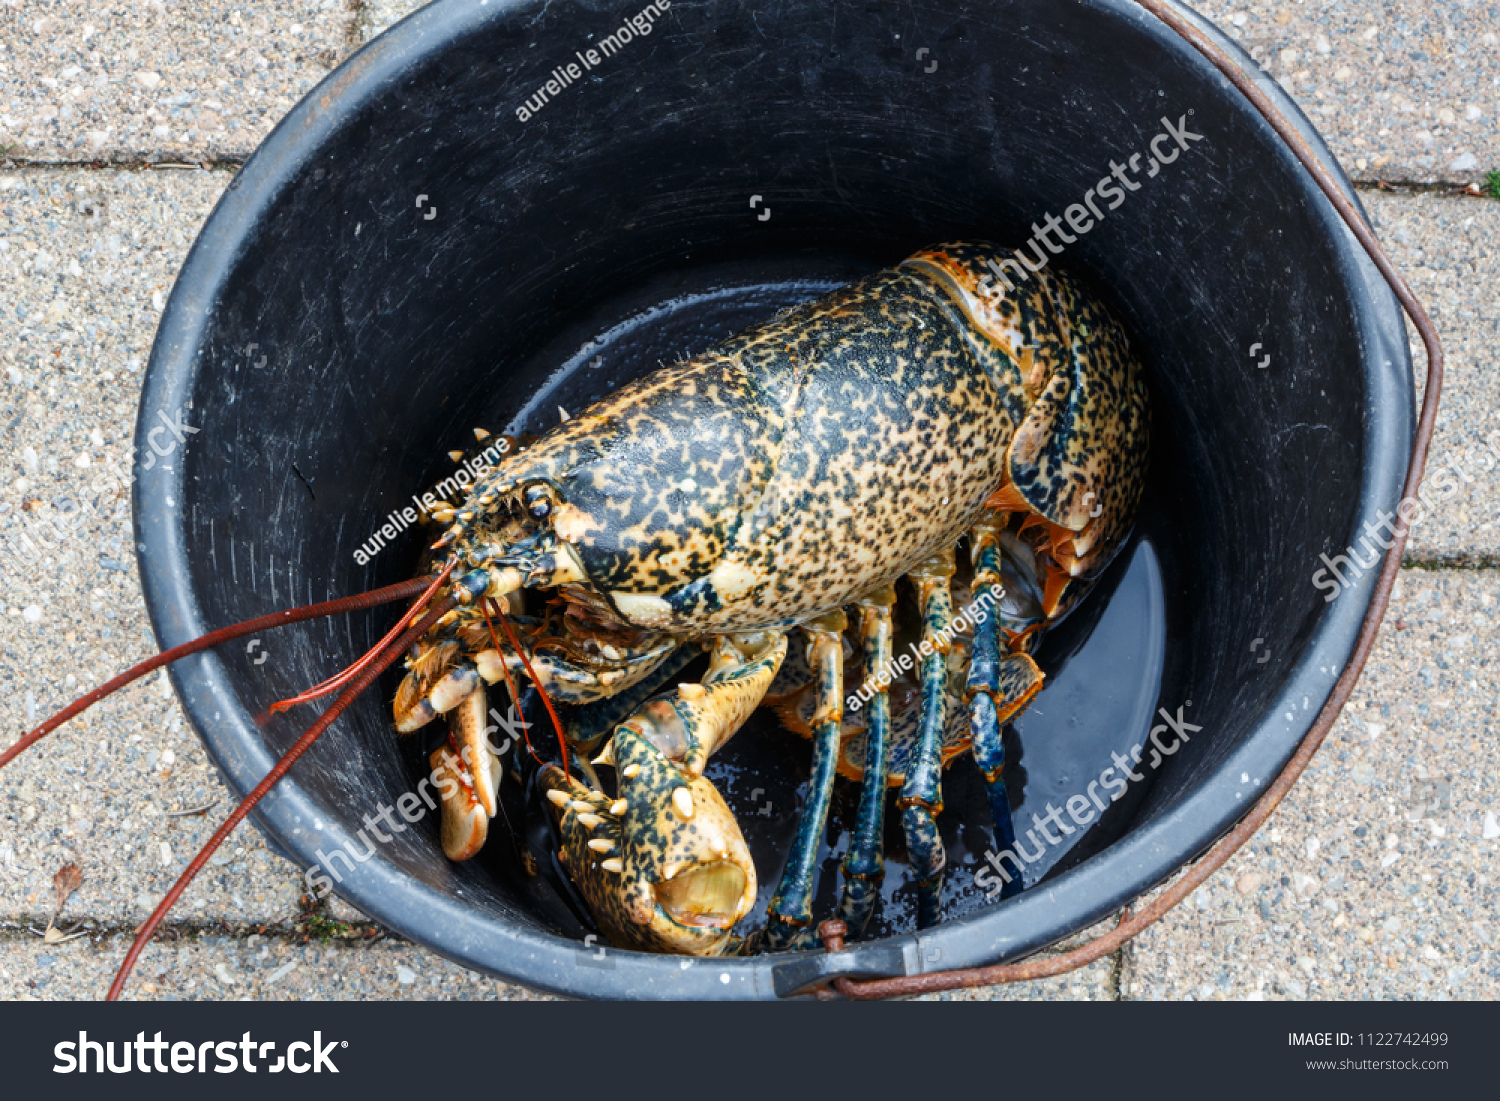 Breton alive lobster in a bucket after fishing in Brittany #1122742499